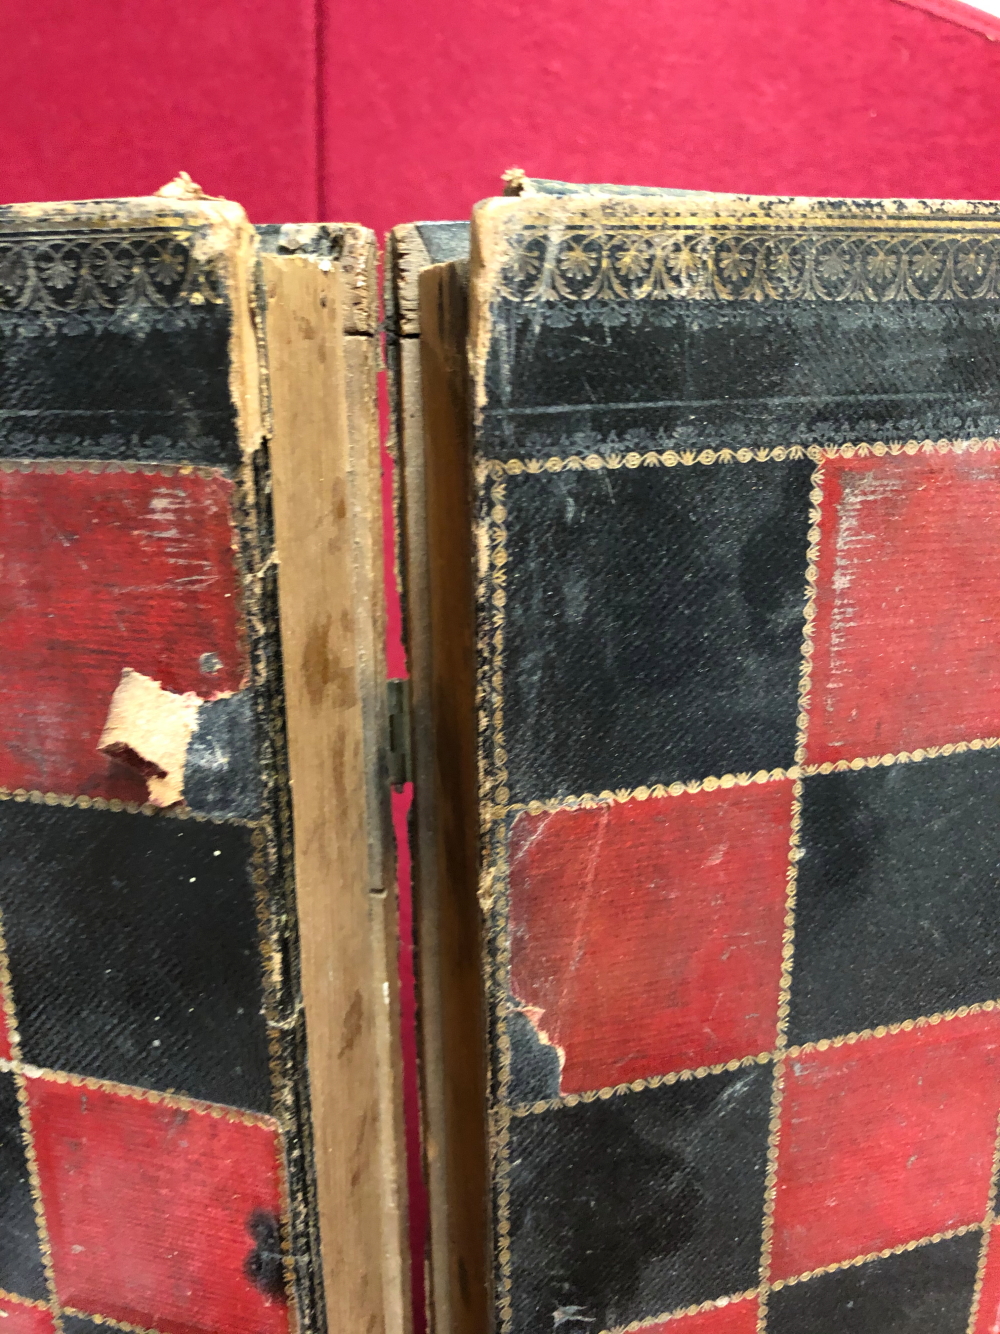 A RED, BLACK AND GILT LEATHER MOUNTED CHESS BOARD DISGUISED AS TWO VOLUMES ON THE HISTORY OF ENGLAND - Image 9 of 11